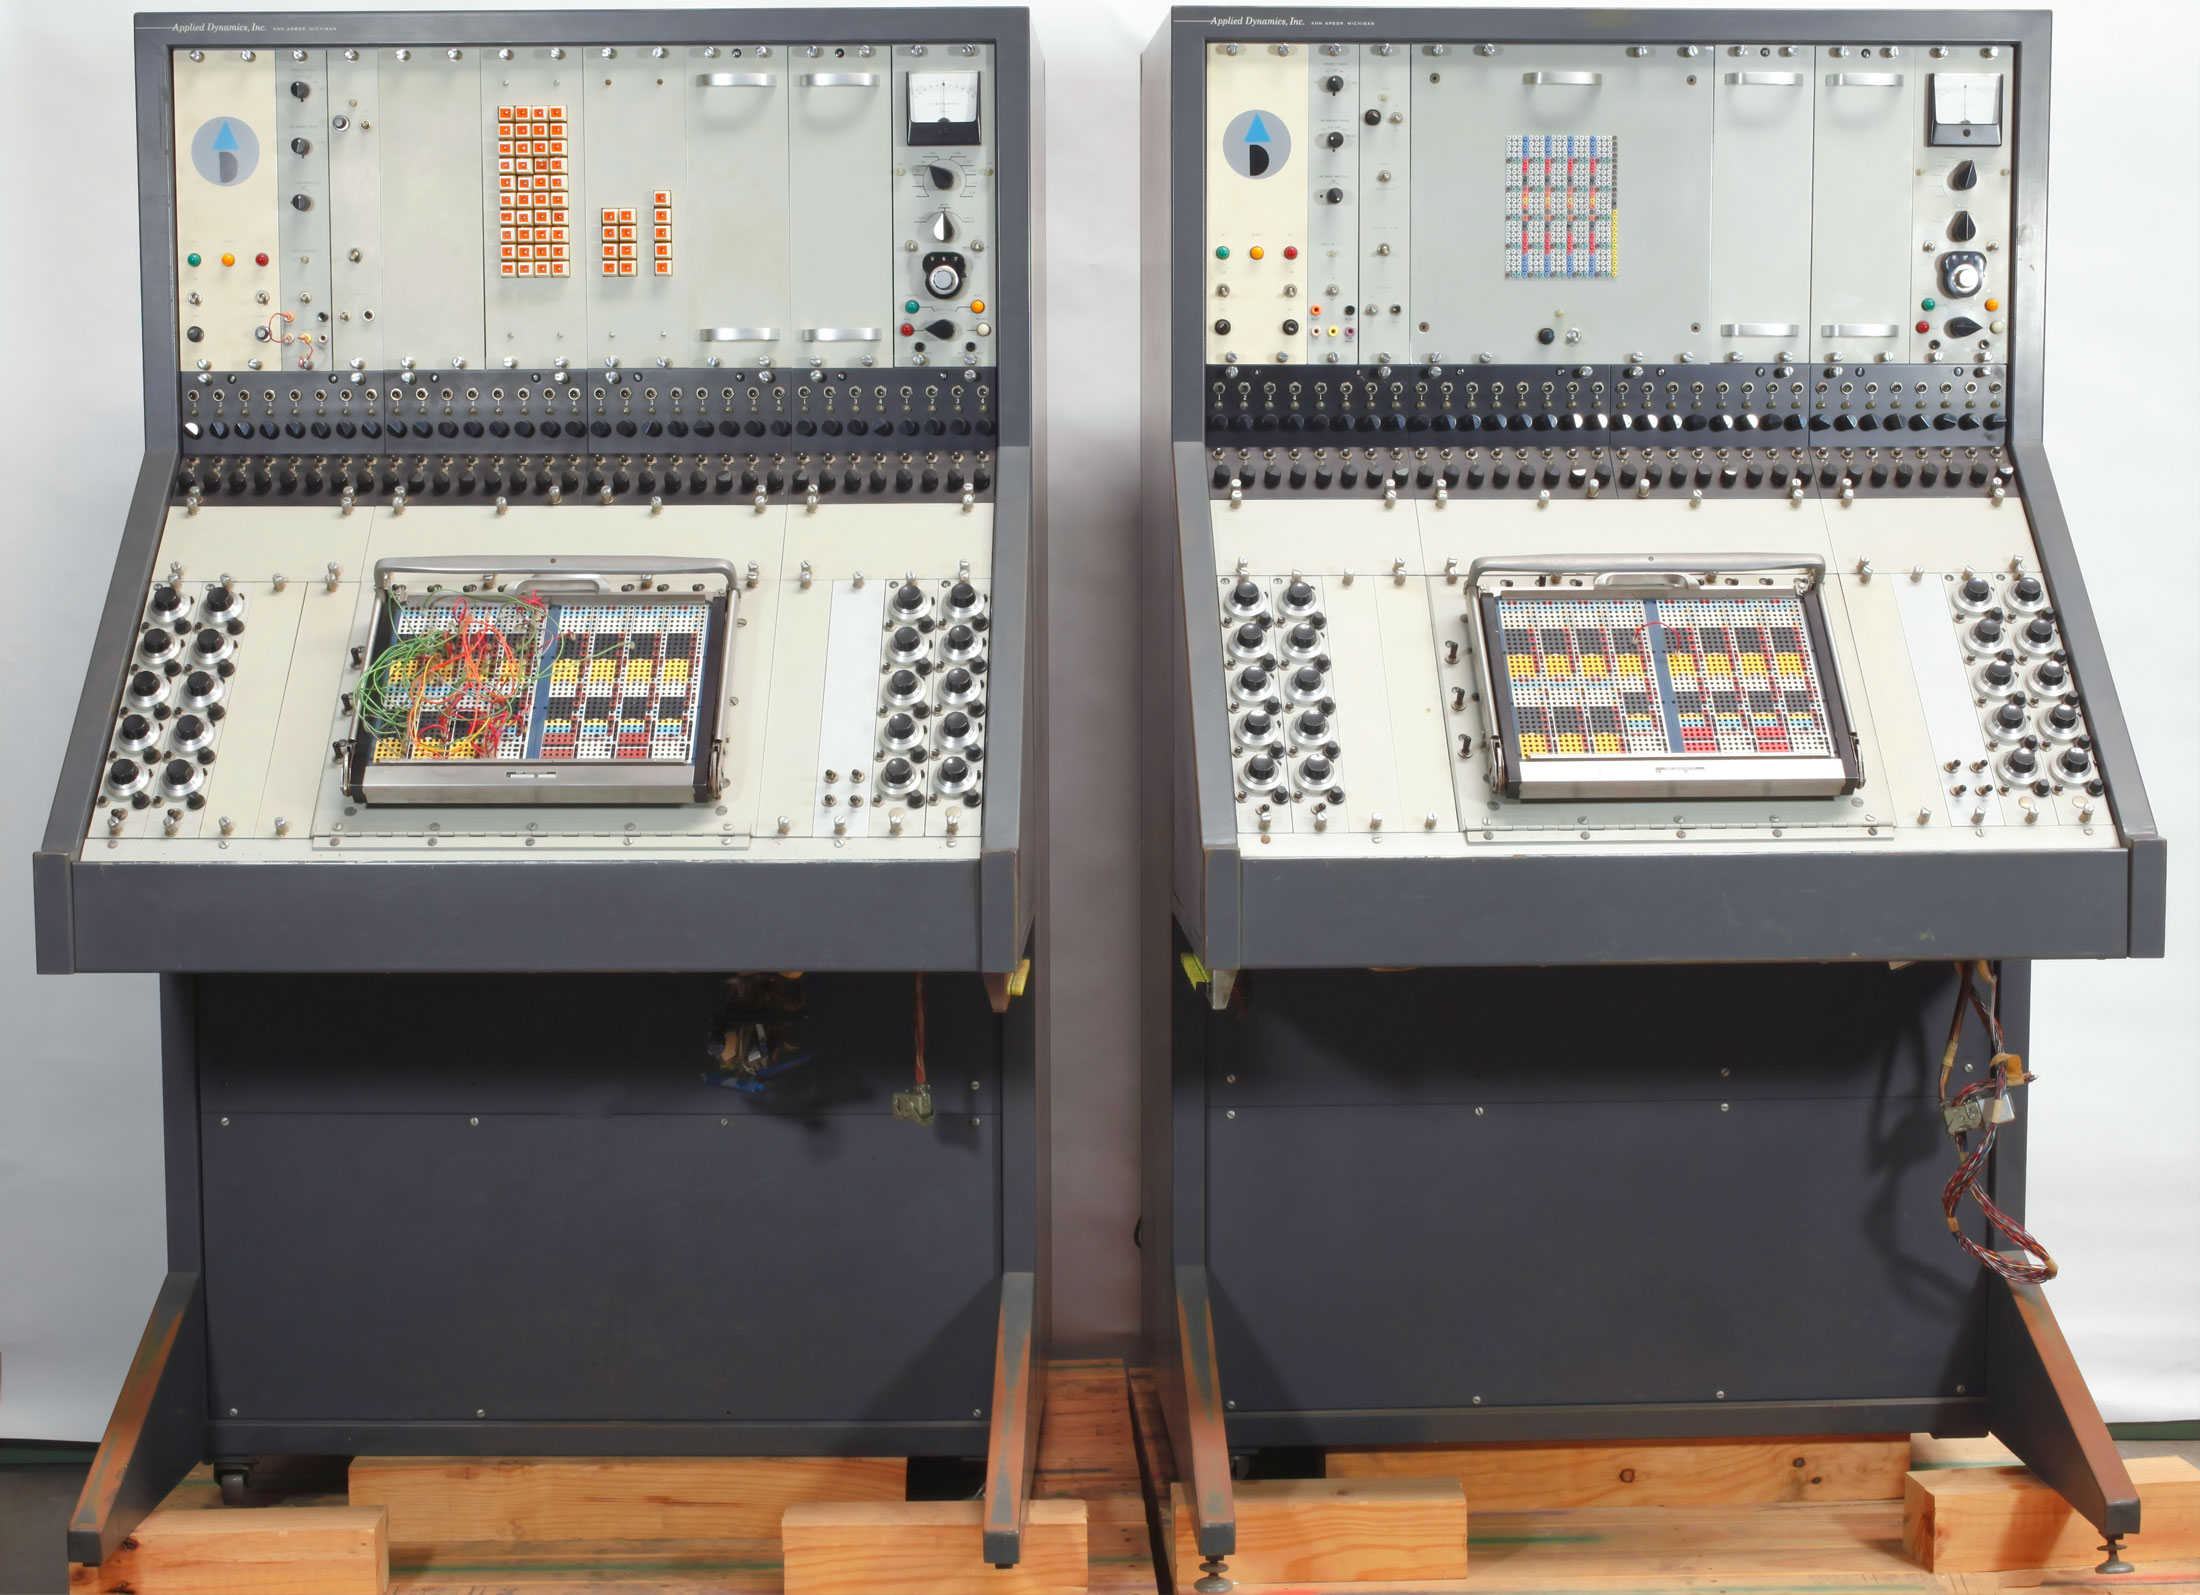 Control panel of the 1st nuclear power plant ever built, with retro 1950s style, dials, buttons and lights.